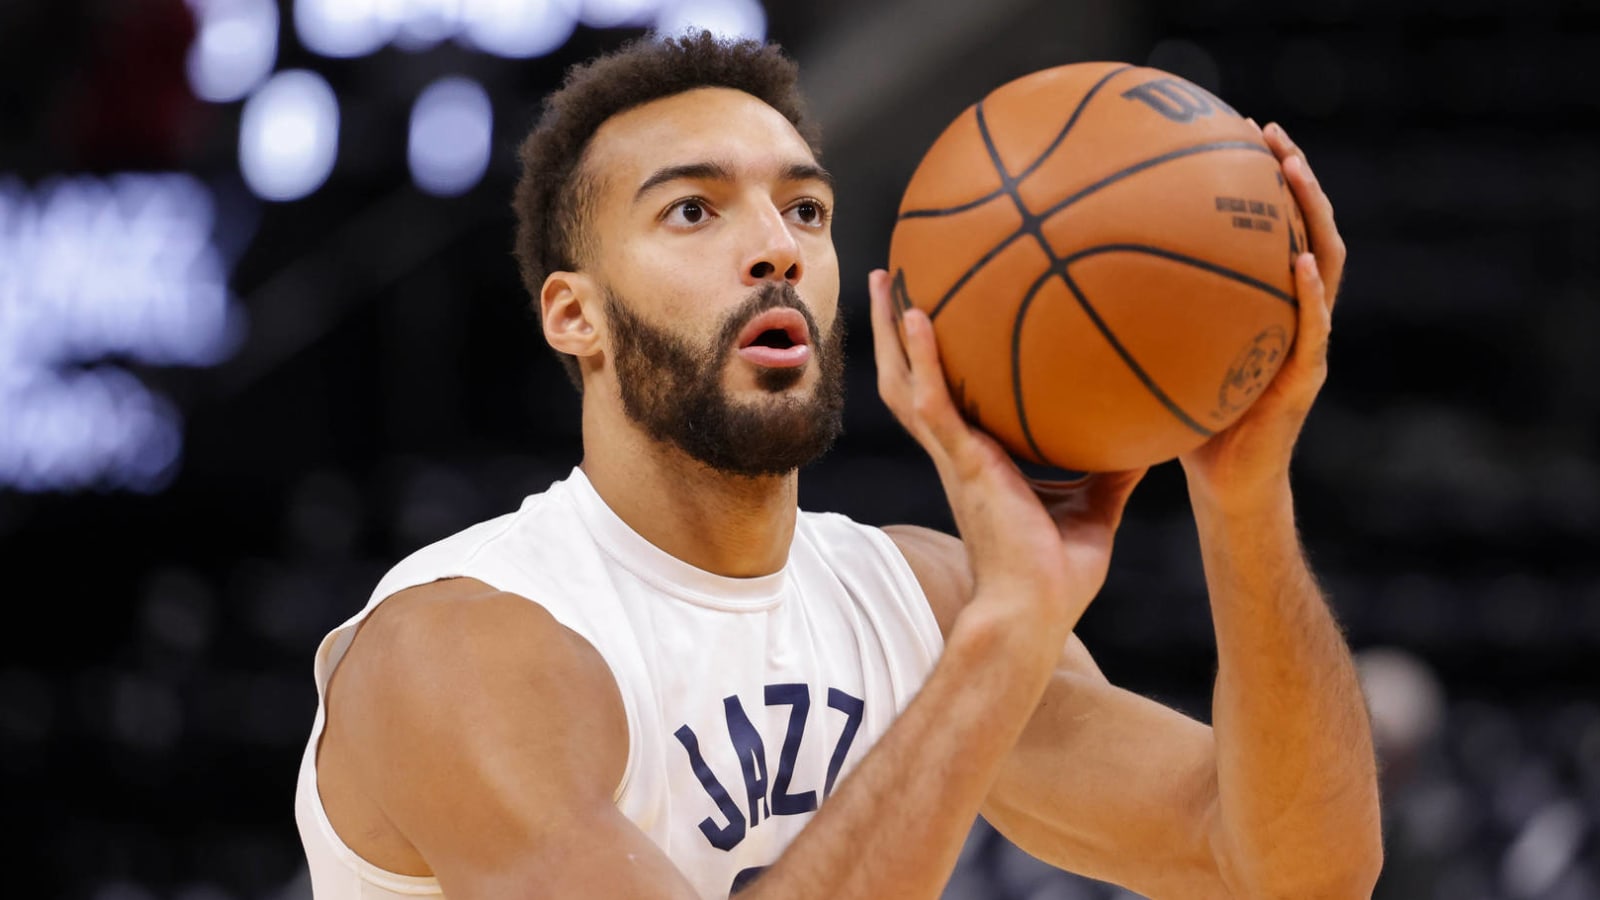 Rudy Gobert on fan who delayed game: 'He was smiling and throwing up at the same time.'